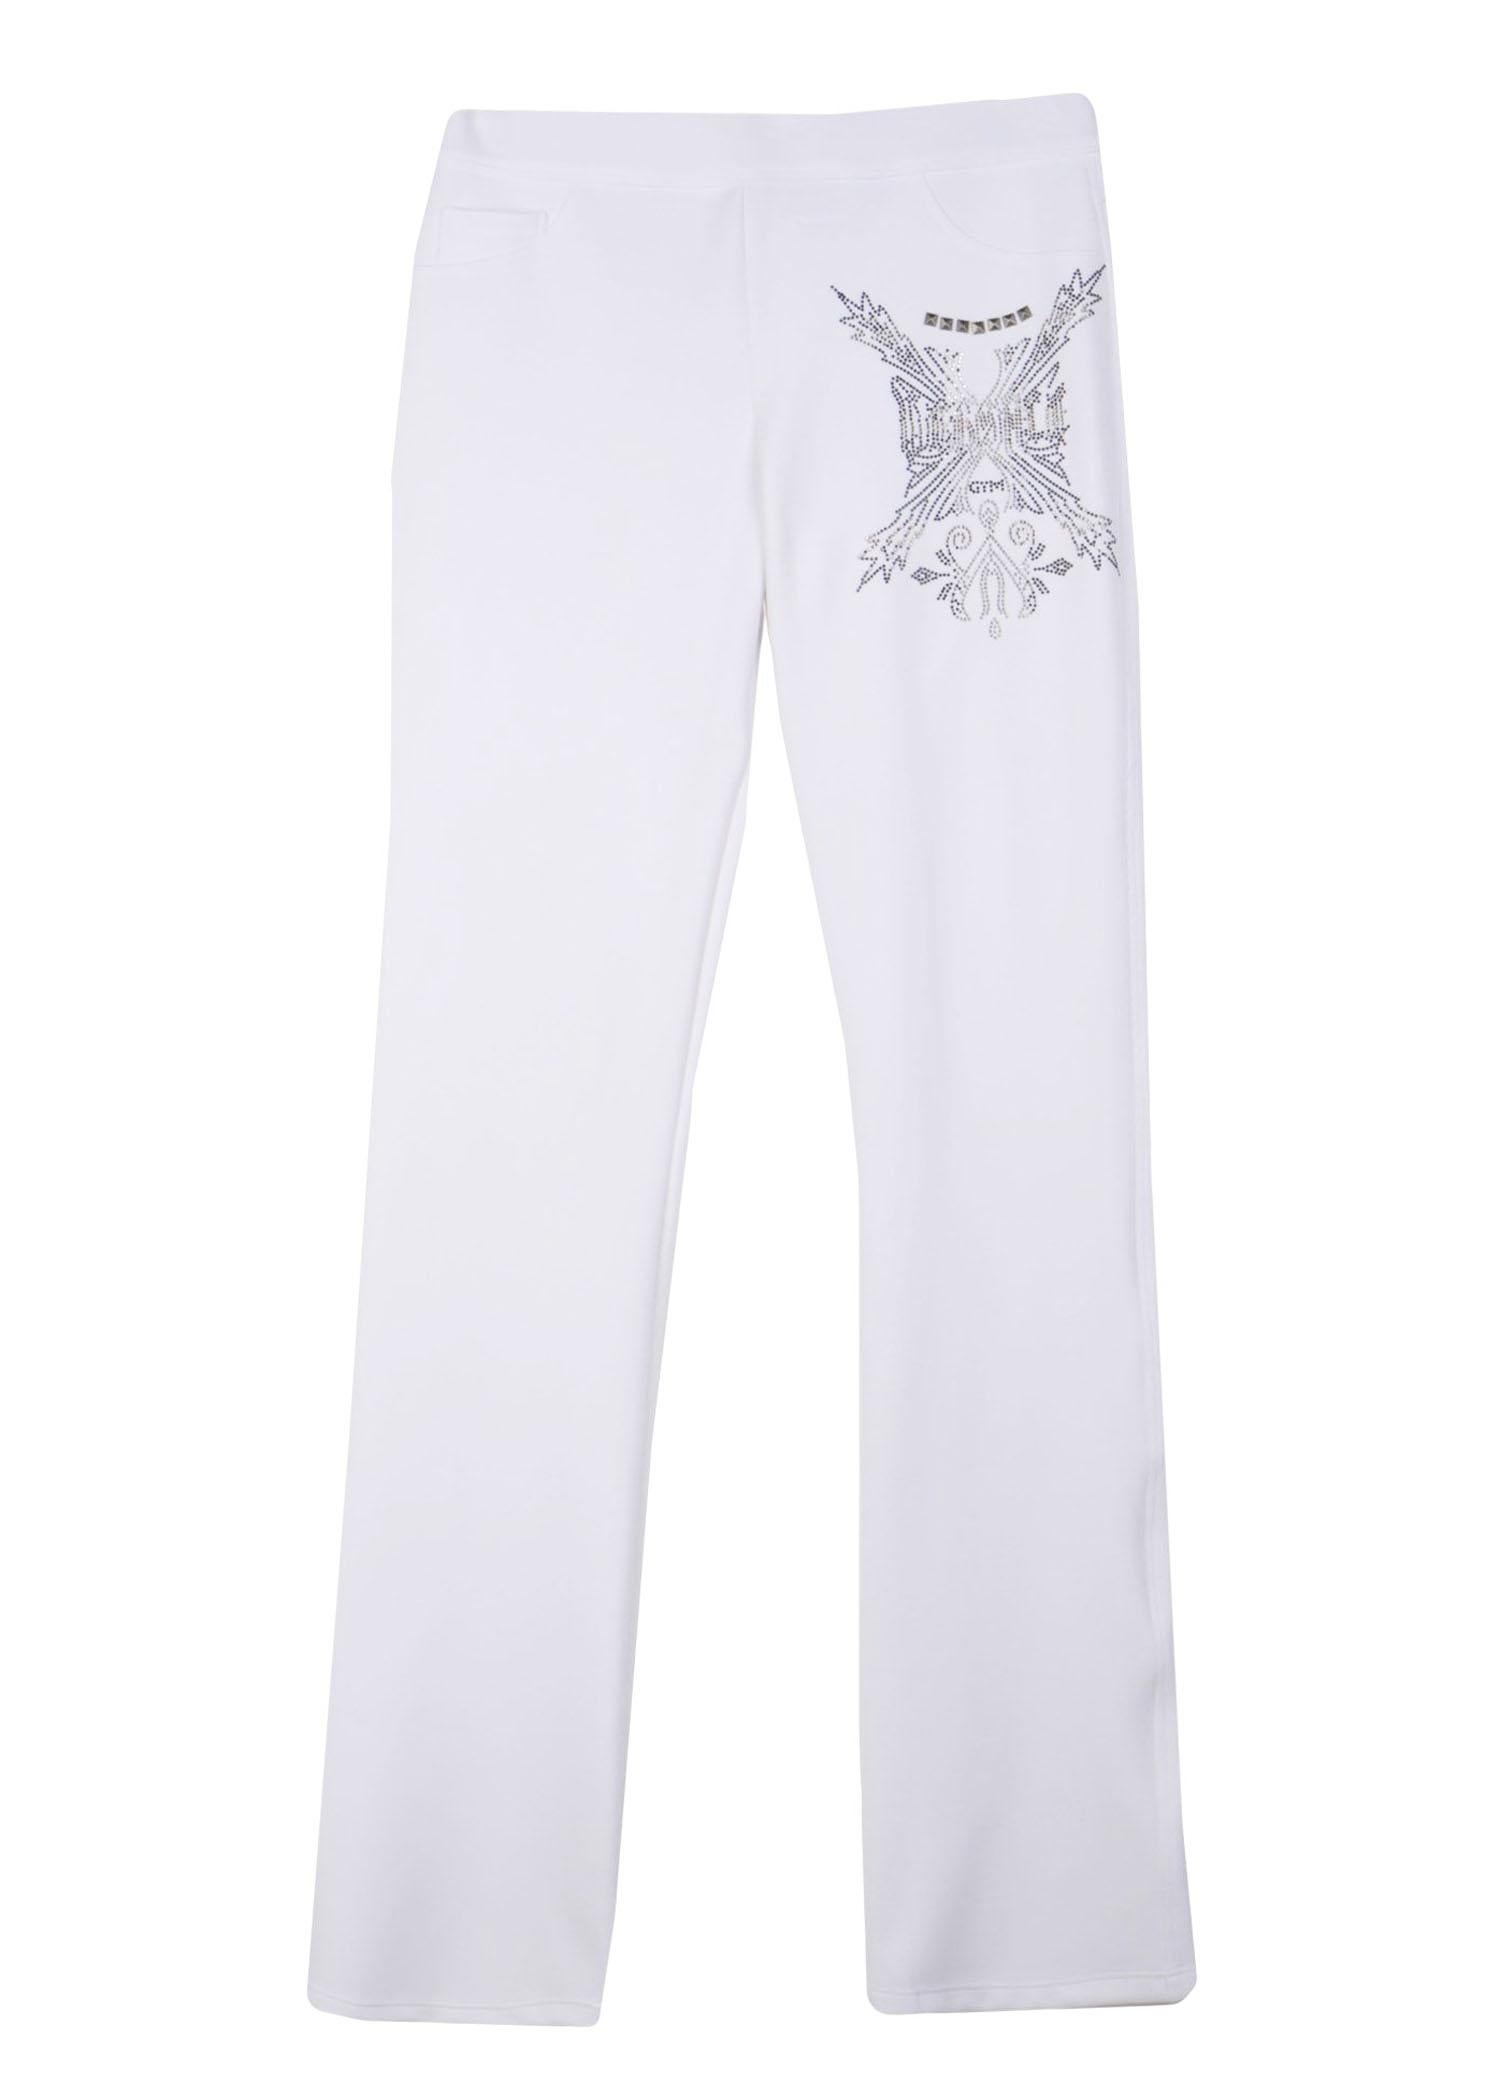 New Versace Women's White Gym Pant Suit with Crystal Embellishment  US 6 and 8 For Sale 2